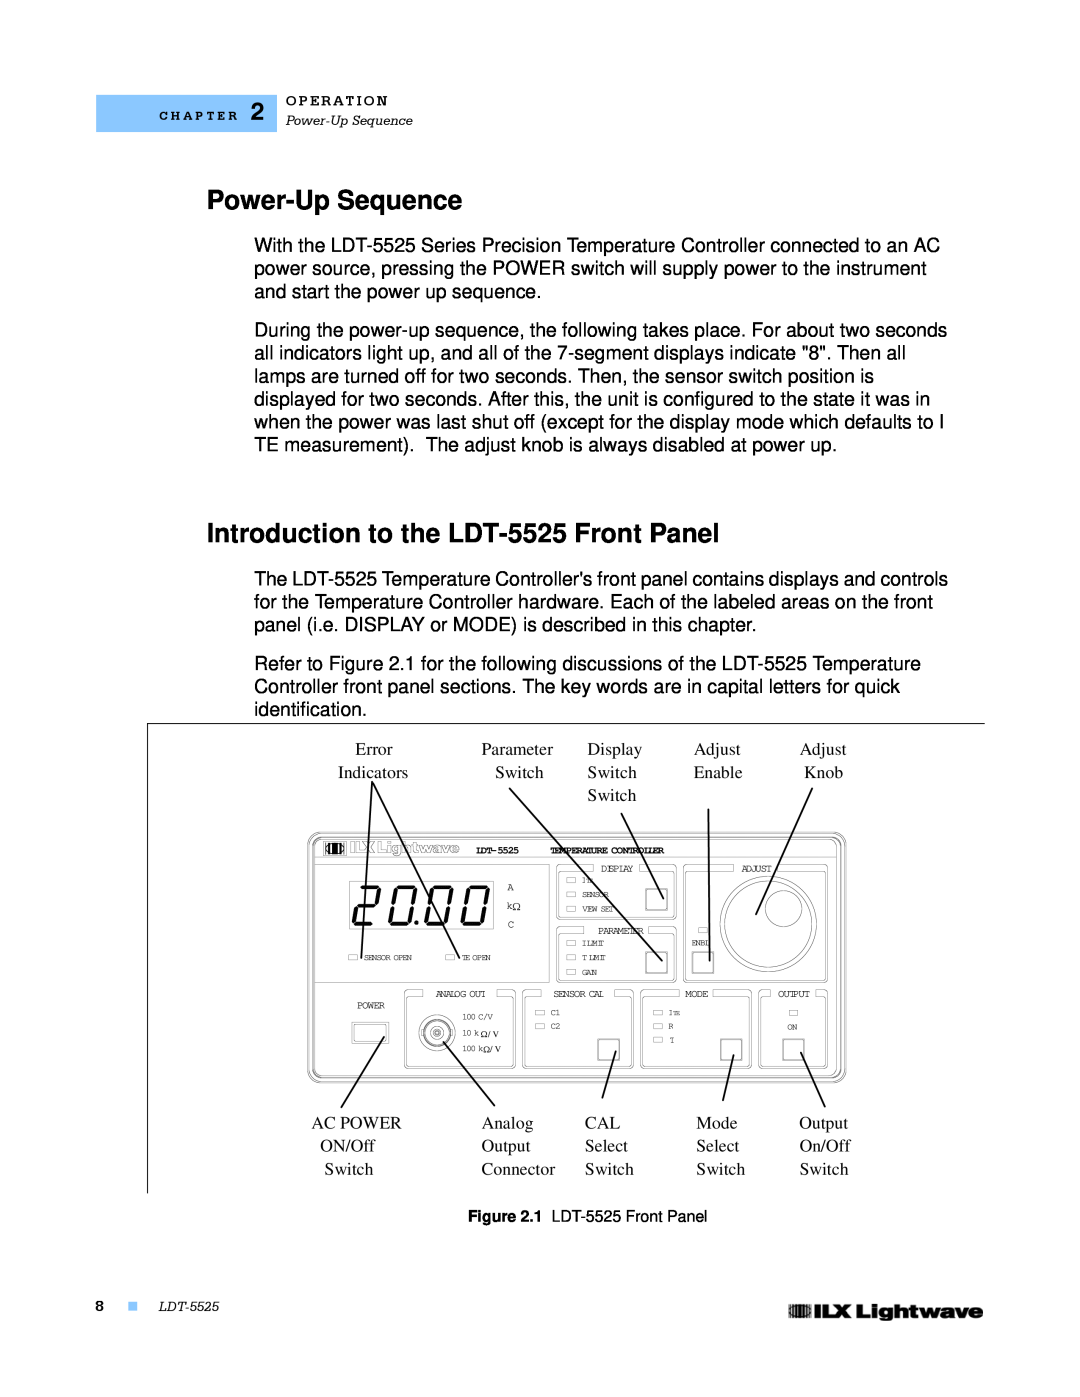 Lightwave Communications manual Power-Up Sequence, Introduction to the LDT-5525 Front Panel, 1 LDT-5525 Front Panel 